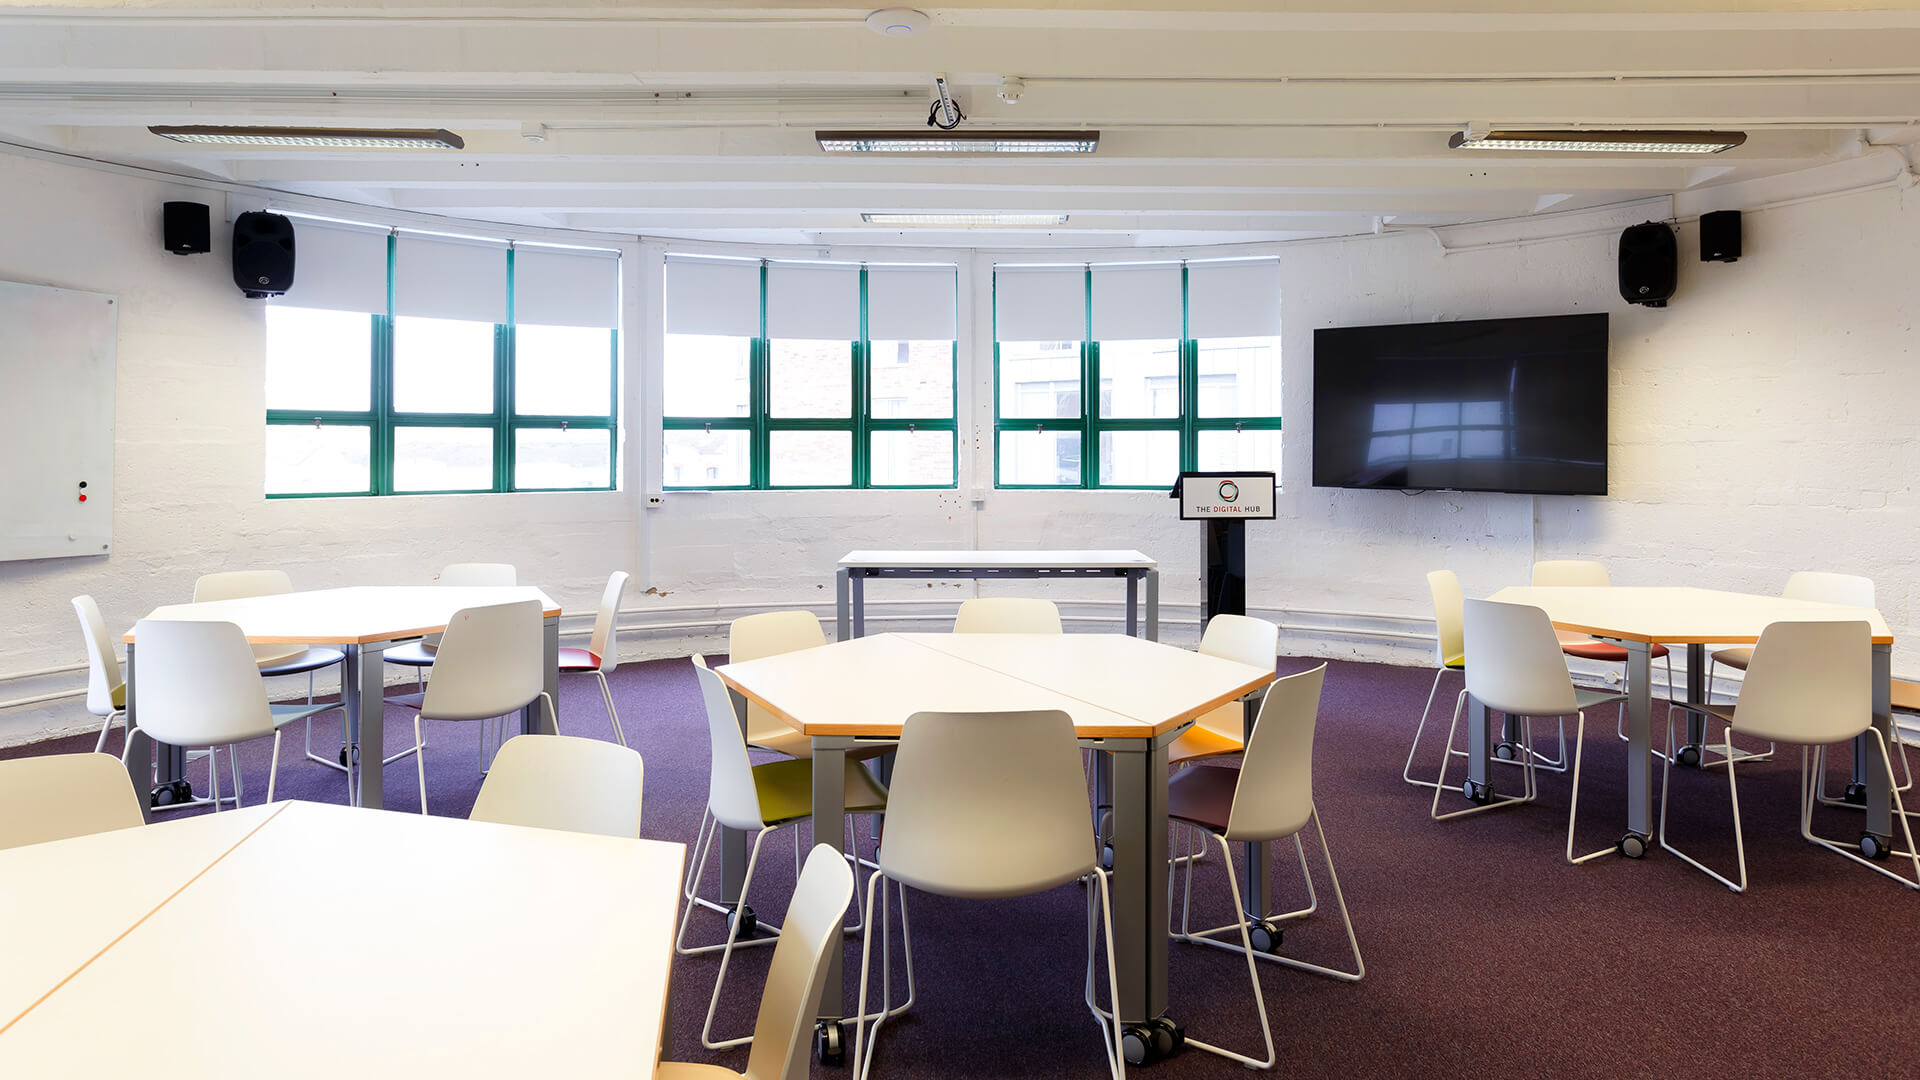 A wide-angle shot of the Learning Studio showing wide windows and hexagonal desks